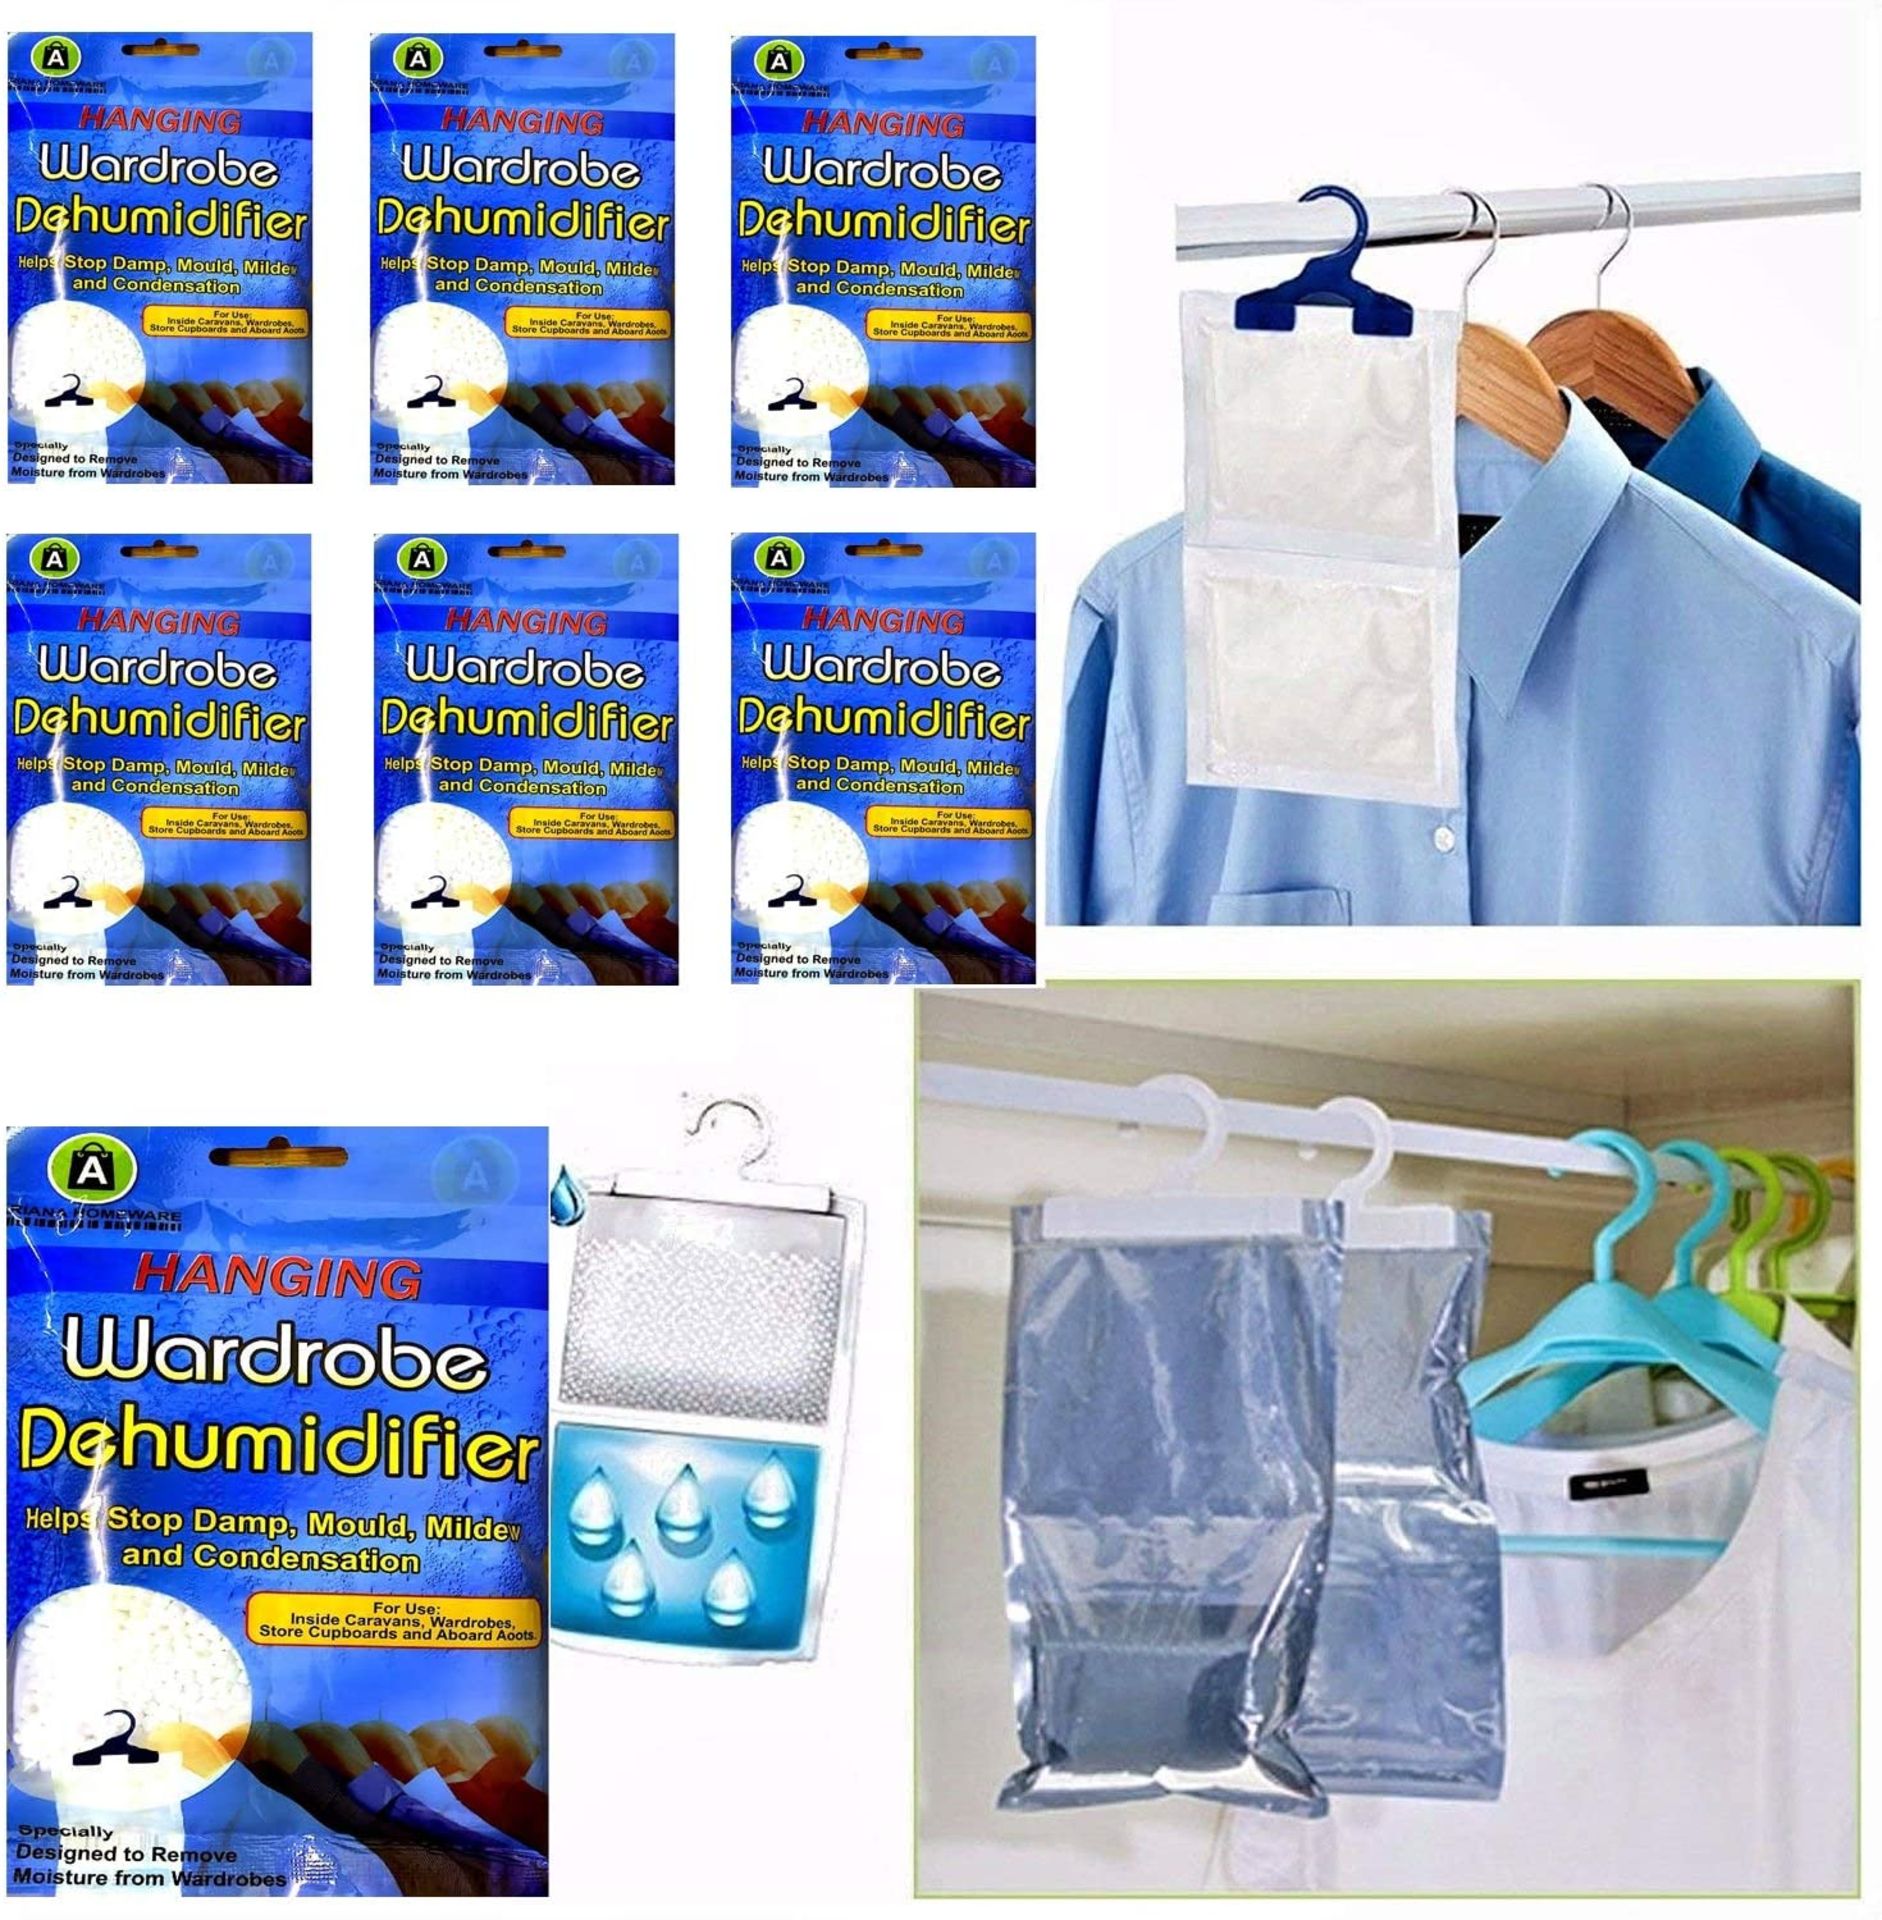 RRP - £4.85 6 x Hanging Wardrobe Dehumidifier Stop Moisture Humid Remover Dehumidifiers for Damp, Mo